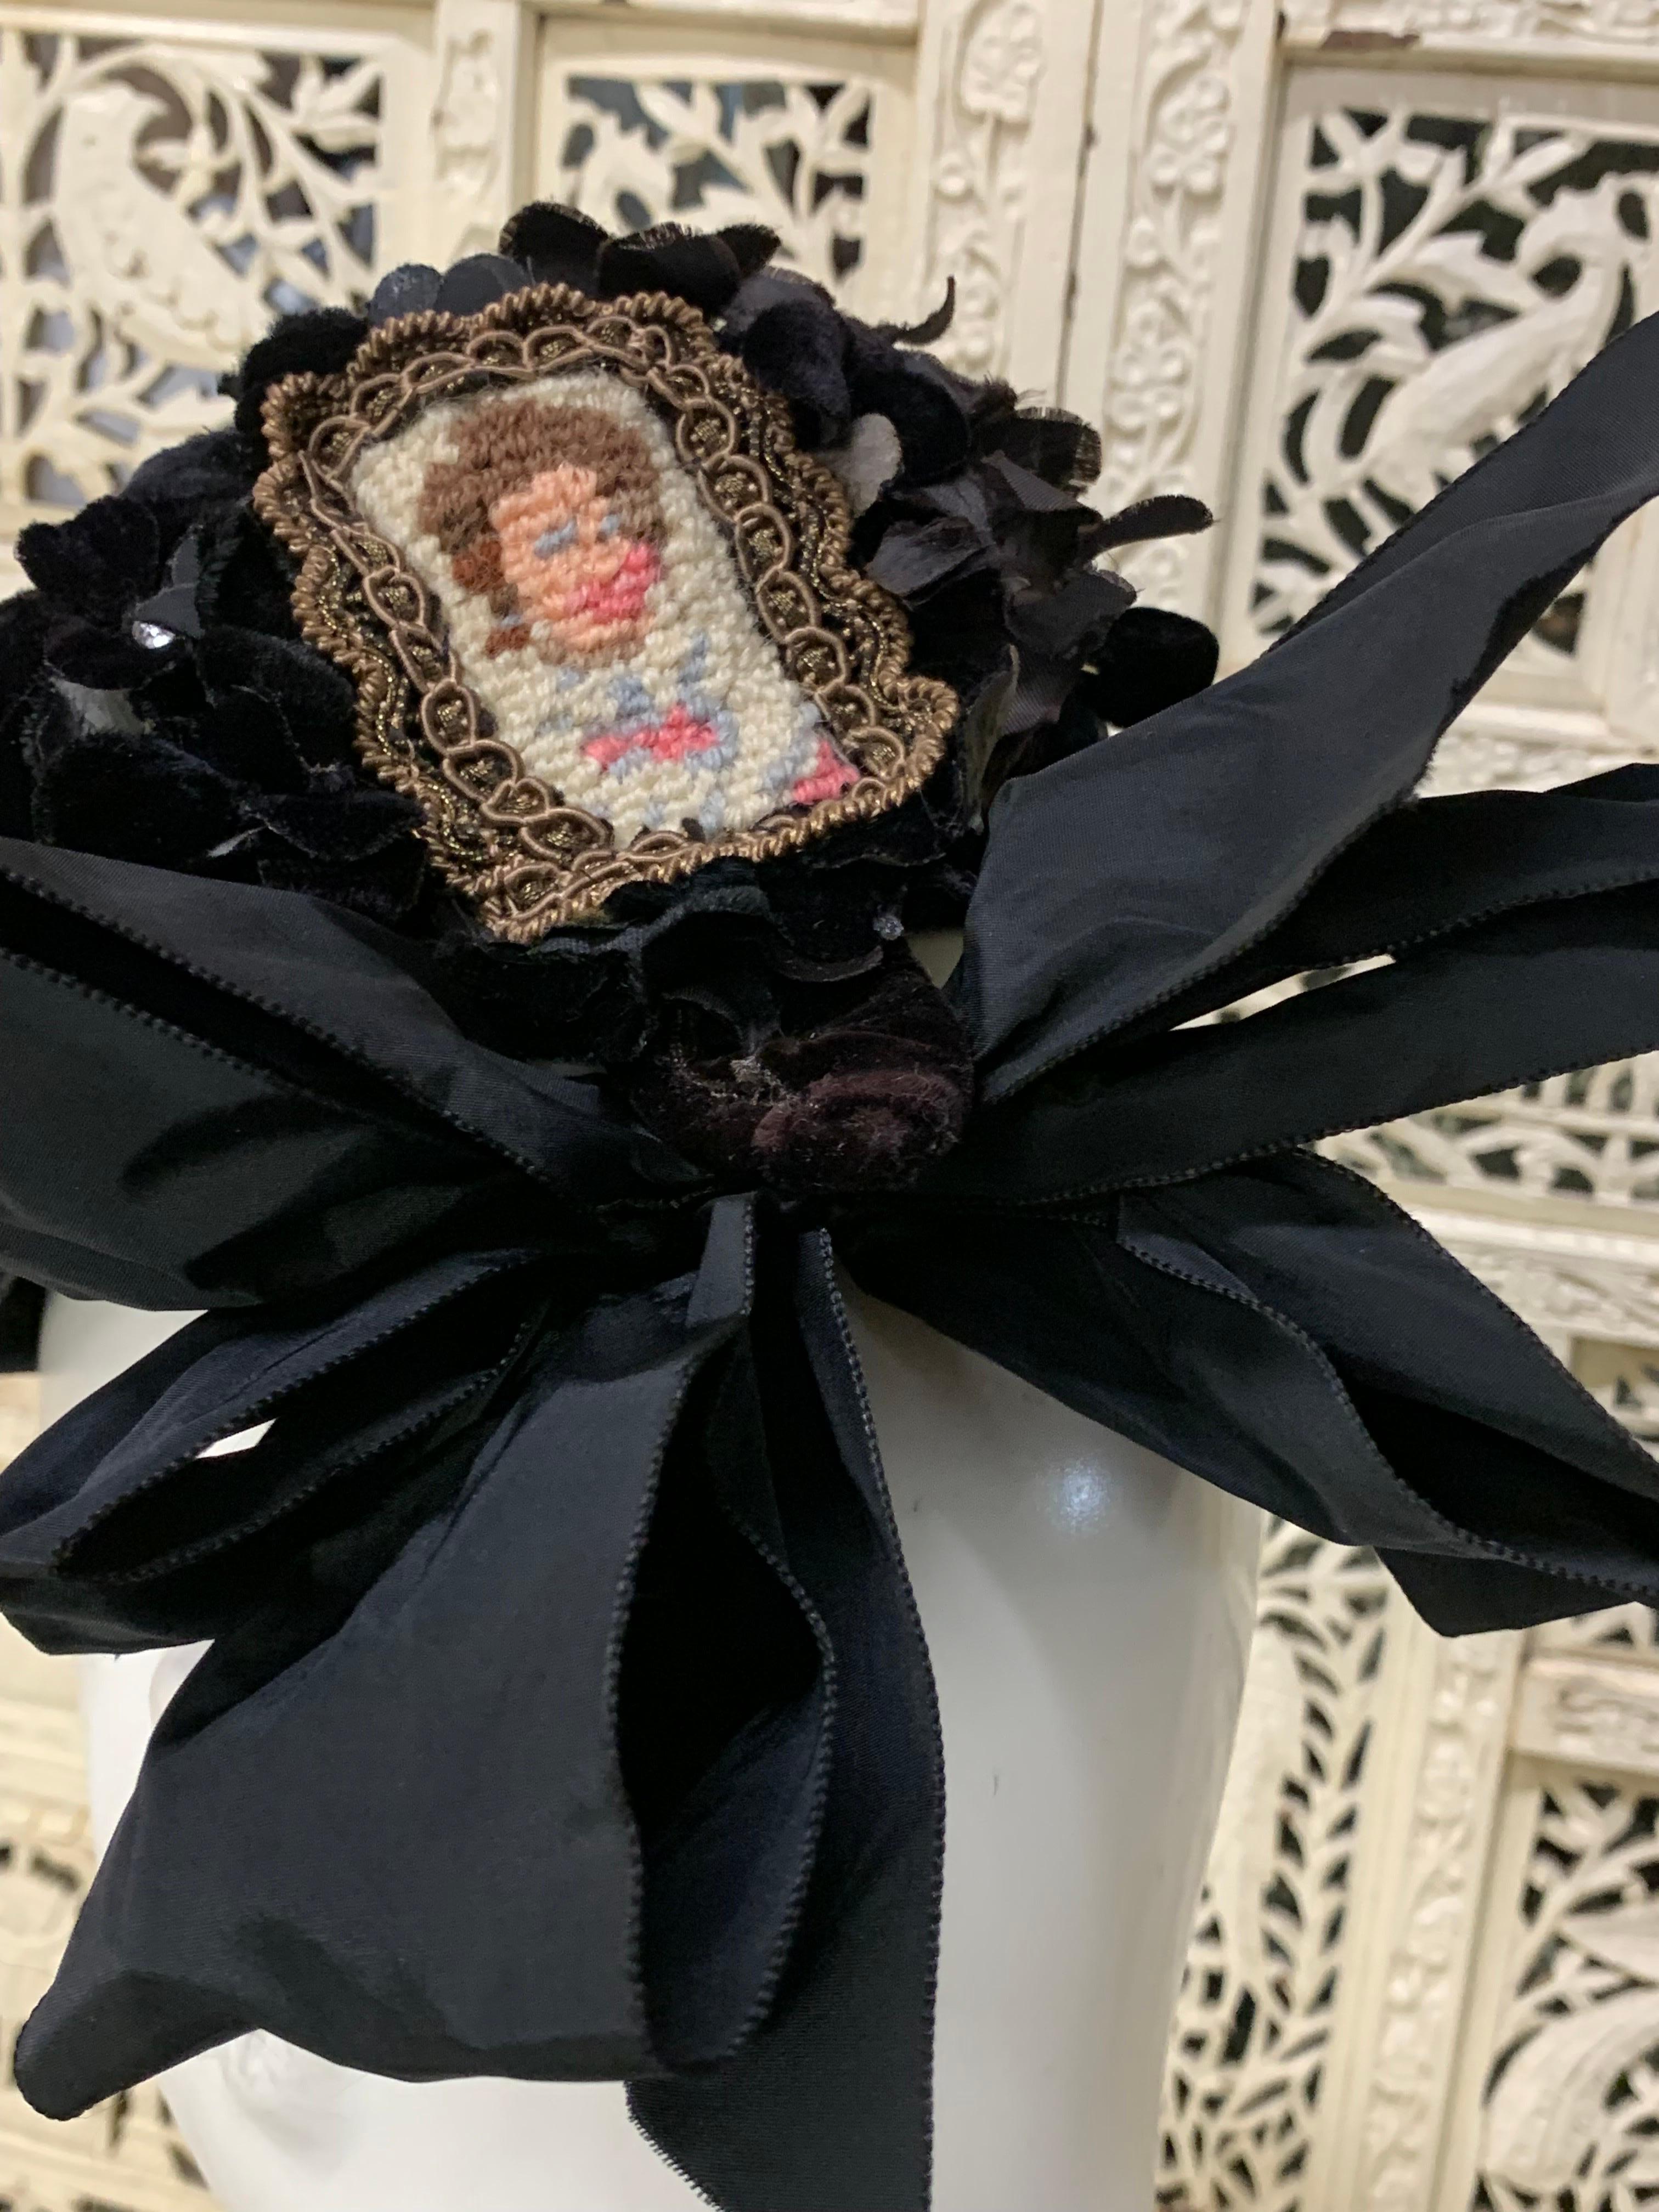 1940s Irina Roublon Couture Avant Garde Pillbox Shaped Velvet Hat w Trompe L'Oeil Needlepoint Portrait:  A true couture piece from a stellar milliner. This unique piece features a framed miniature portrait entirely made of needlepoint at back with 